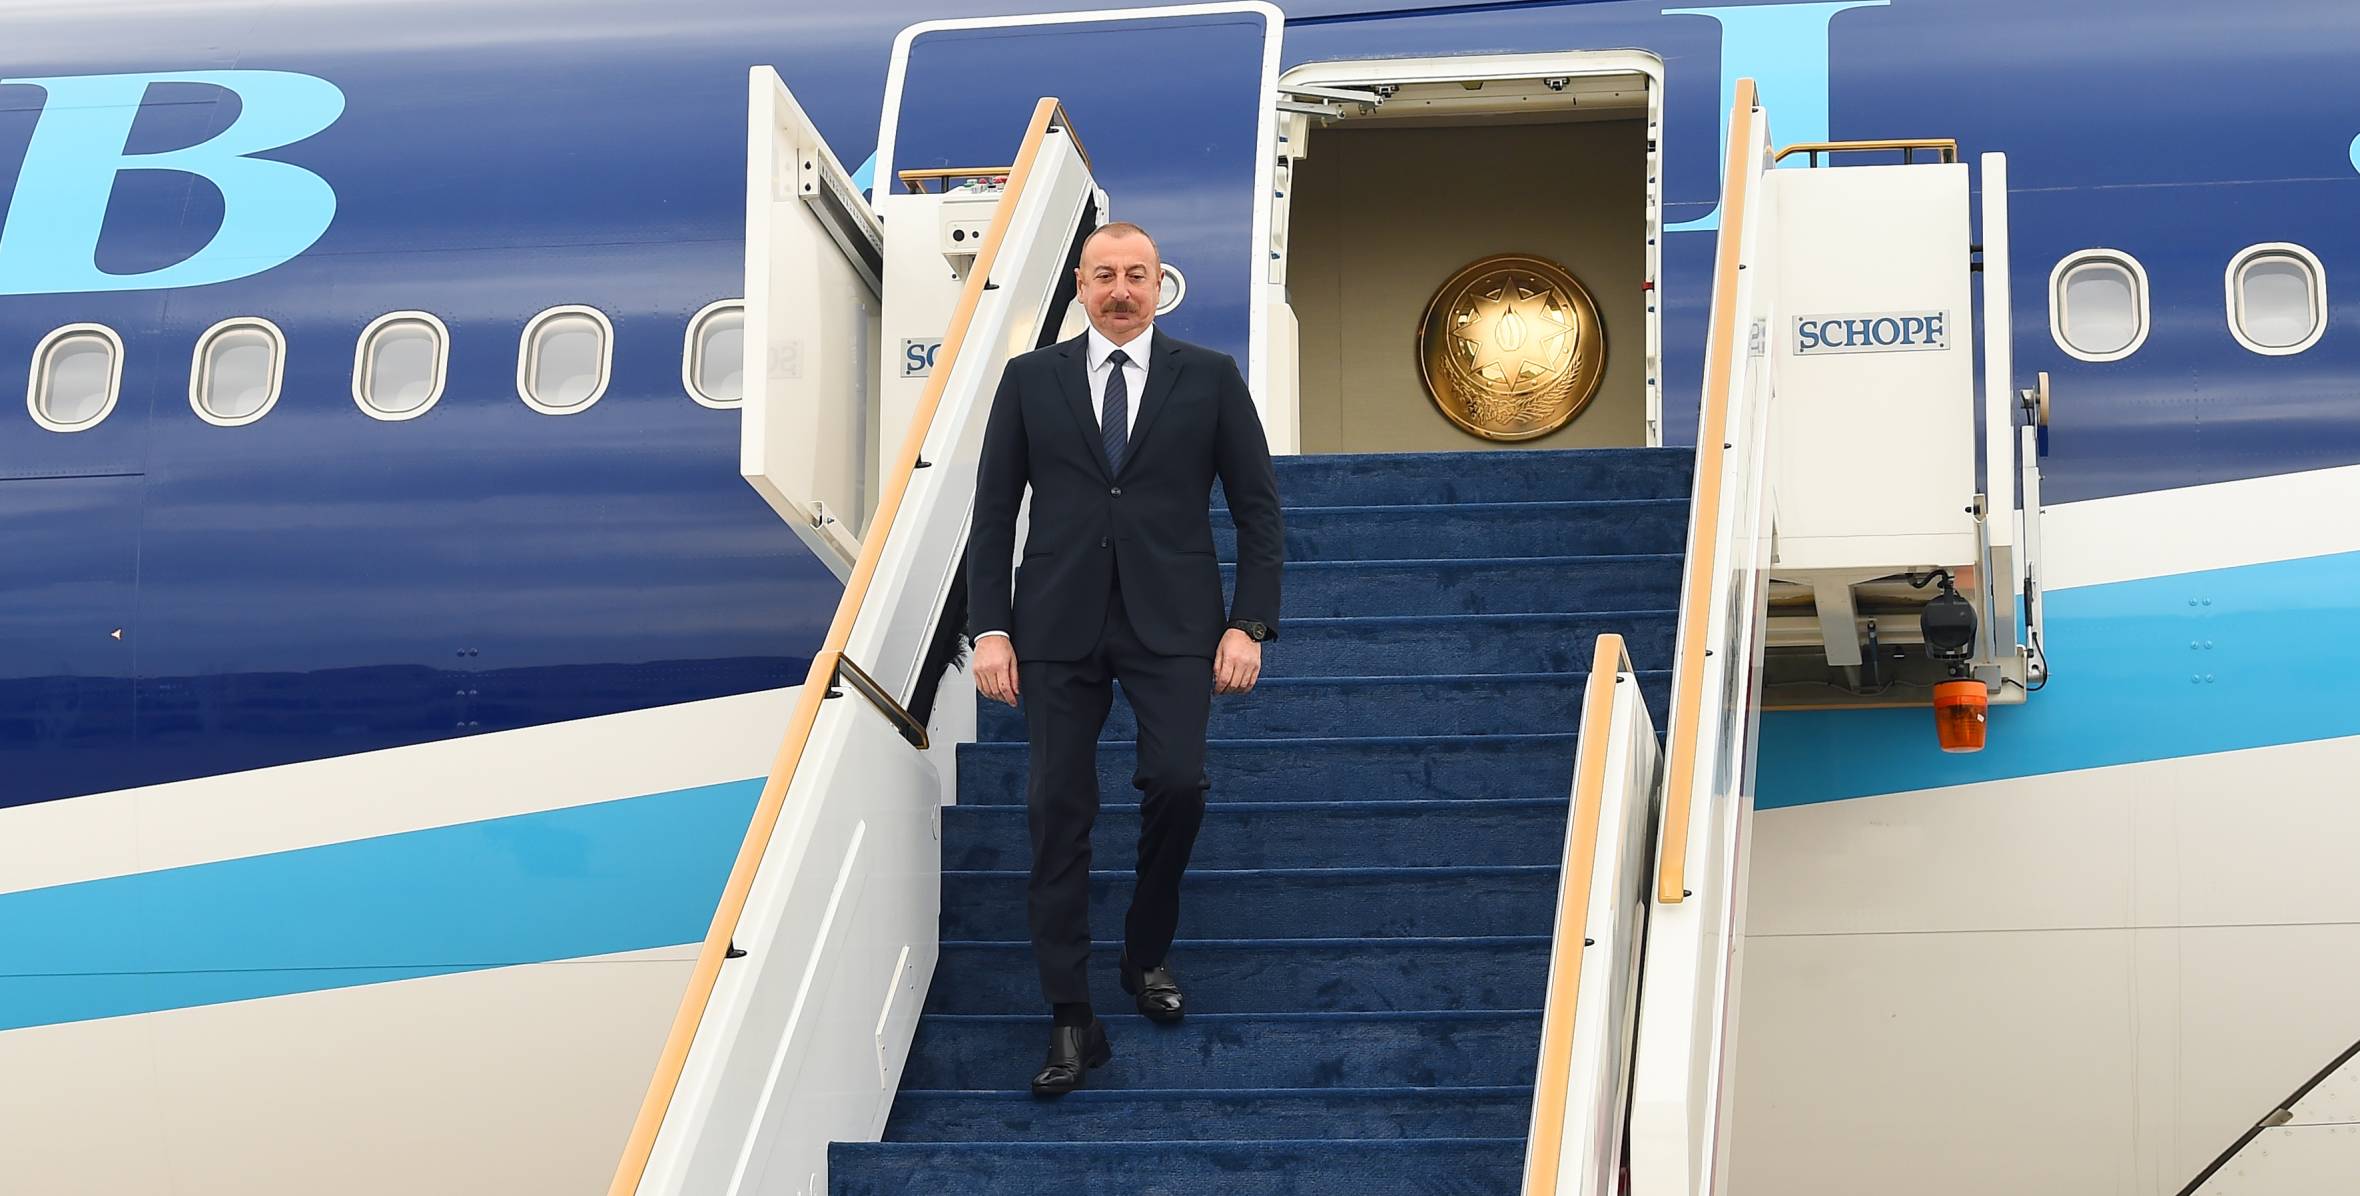 Ilham Aliyev arrived in United Arab Emirates for working visit